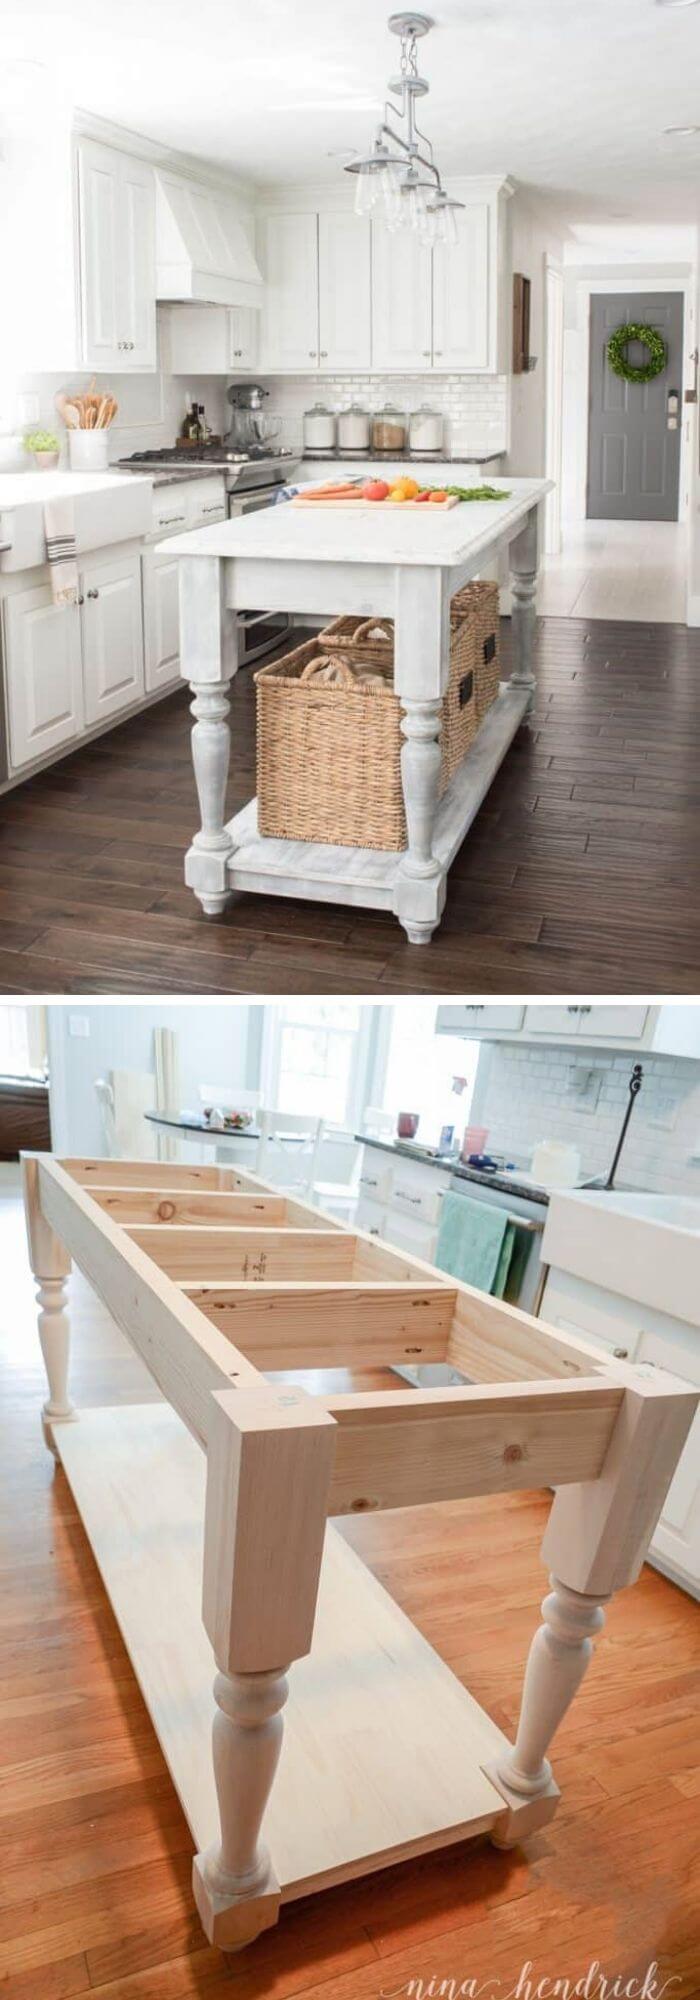 18+ Rustic DIY Kitchen Island Ideas & Designs With Instructions ...